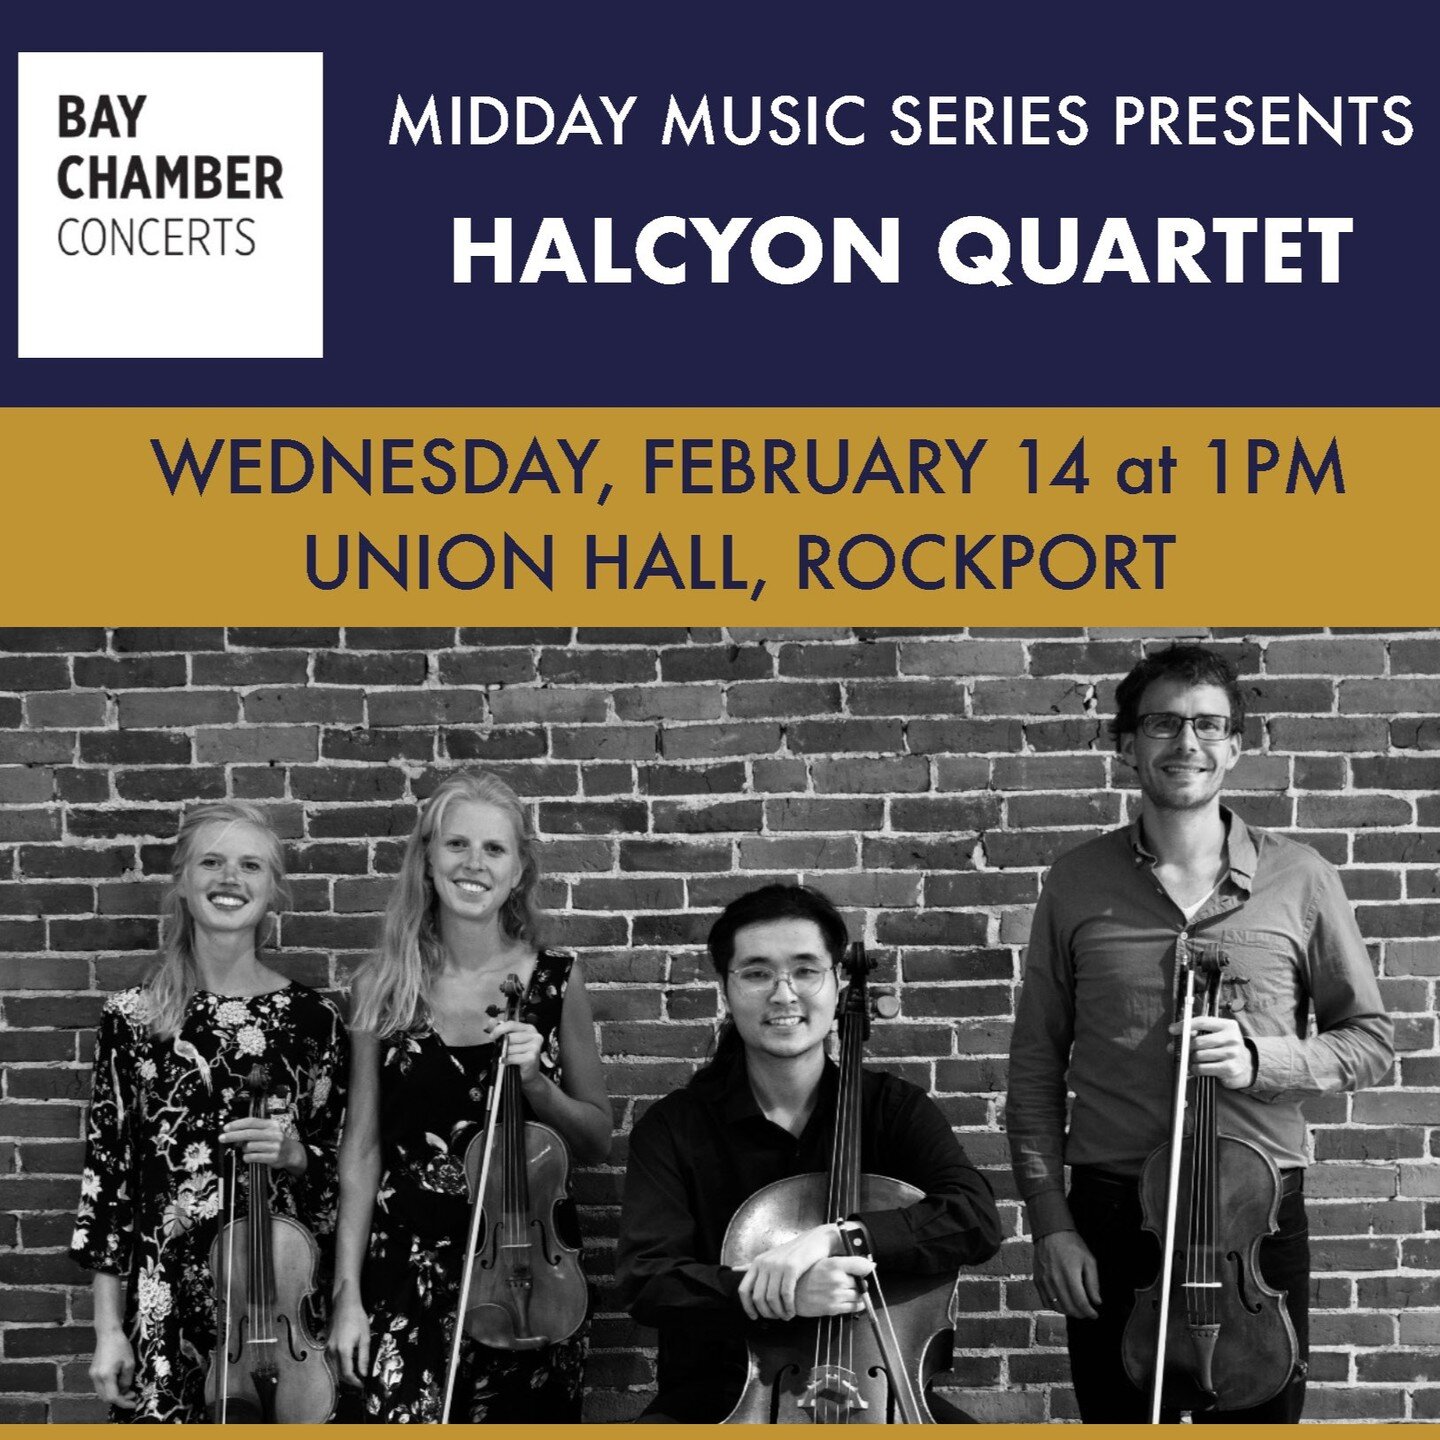 Join us on Valentine's Day for an uplifting concert performed by Halcyon String Quartet. Music by Haydn, Kenji Bunch, Nat King Cole, and more! 

2/14, 1PM in Union Hall. Tickets at baychamber.org and coffee &amp; cookies provided!